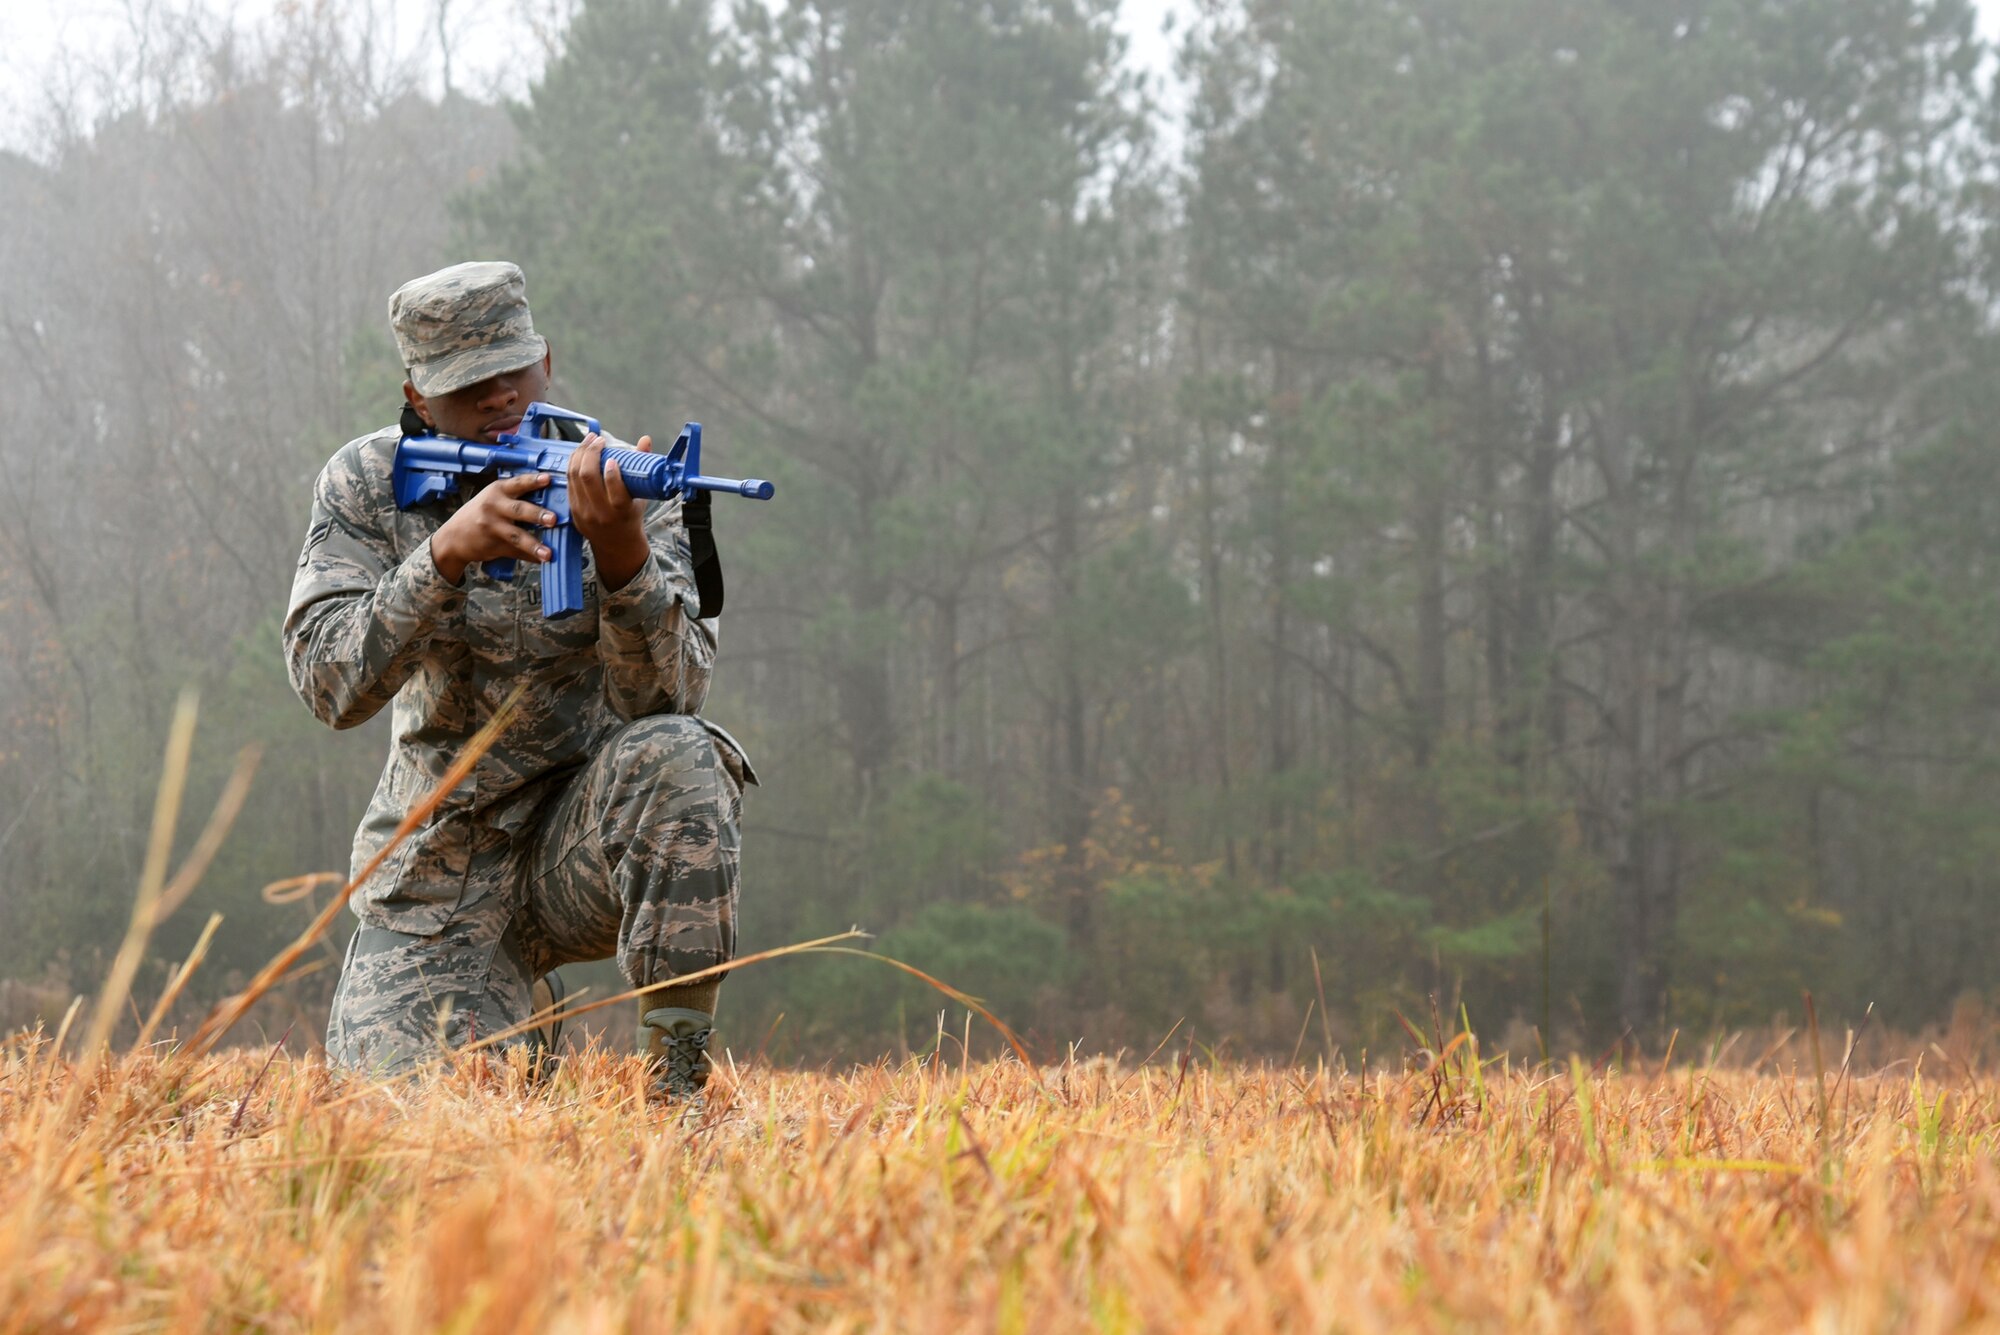 U.S. Air Force Airman 1st Class Taryph Moses, 20th Force Support Squadron food service journeyman, holds a training rifle while participating in a team movement training at Poinsett Electronic Combat Range near Wedgefield, S.C., Dec. 5, 2017.